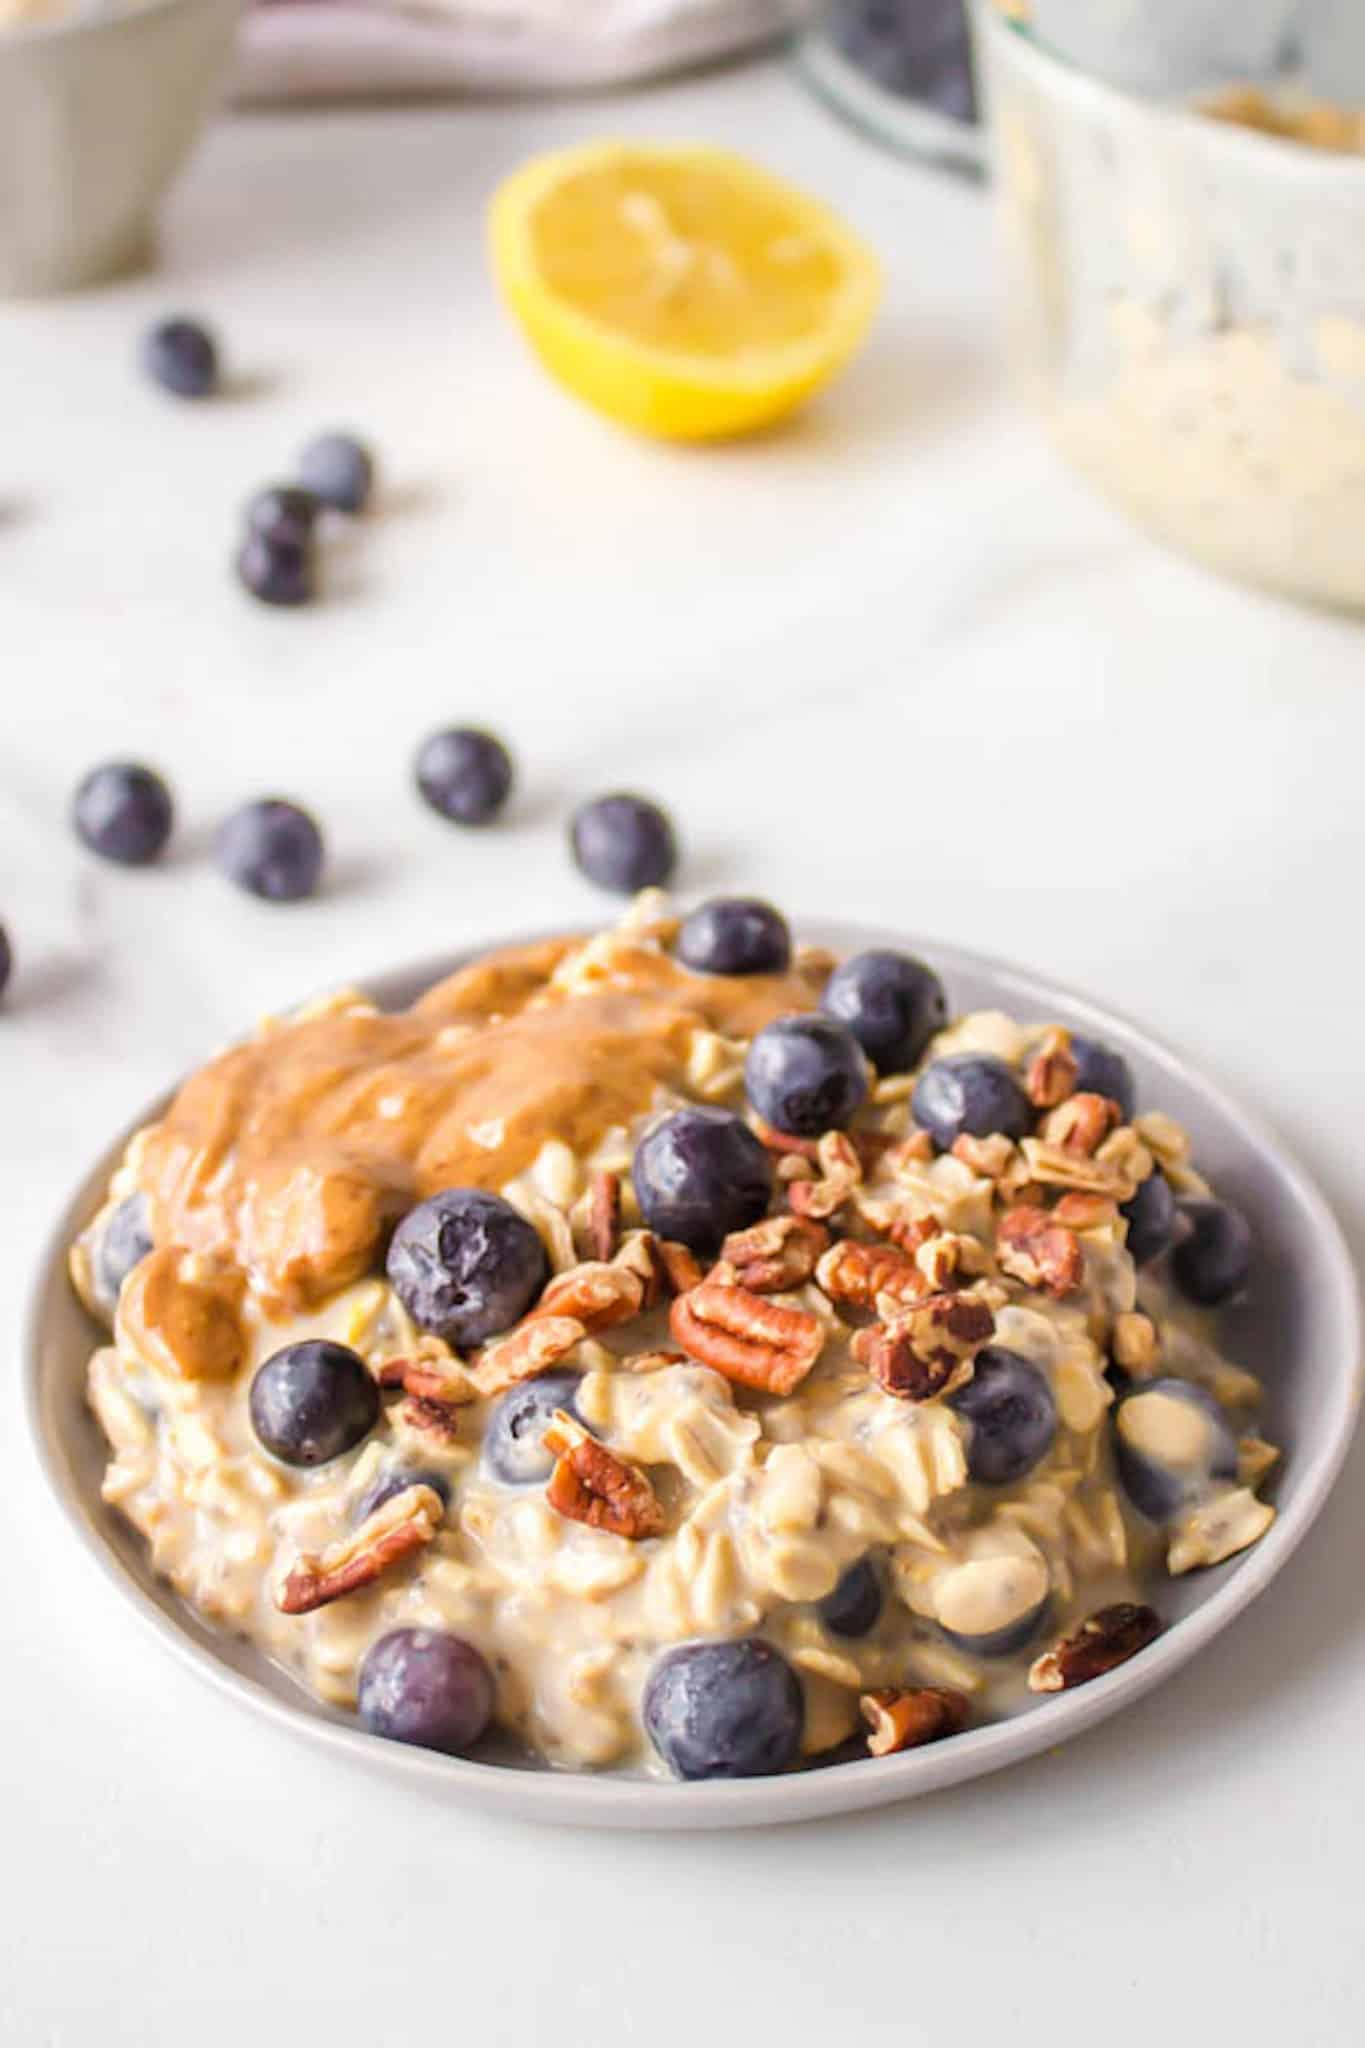 blueberry oatmeal served with nuts and nut butter